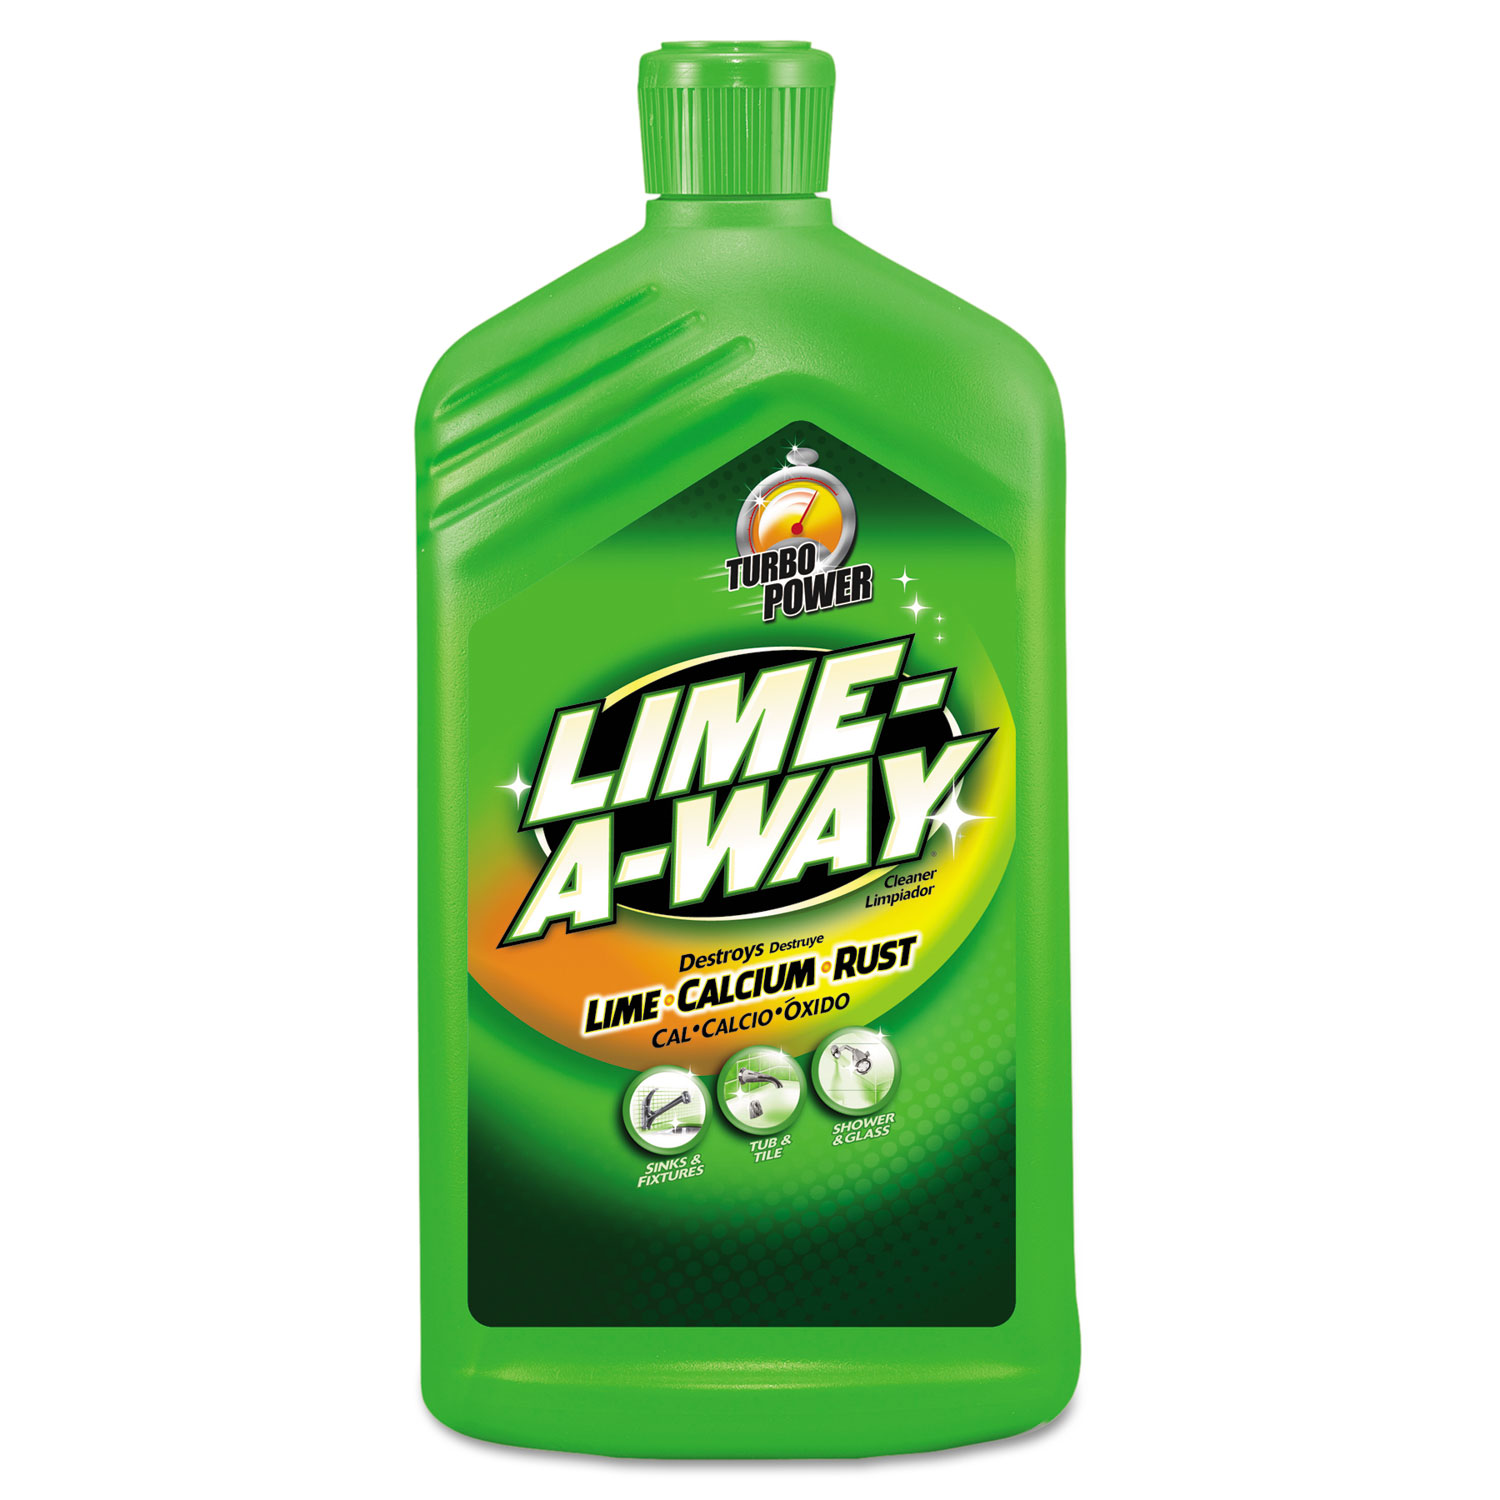  LIME-A-WAY 51700-87000 Lime, Calcium & Rust Remover, 28oz Bottle (RAC87000CT) 